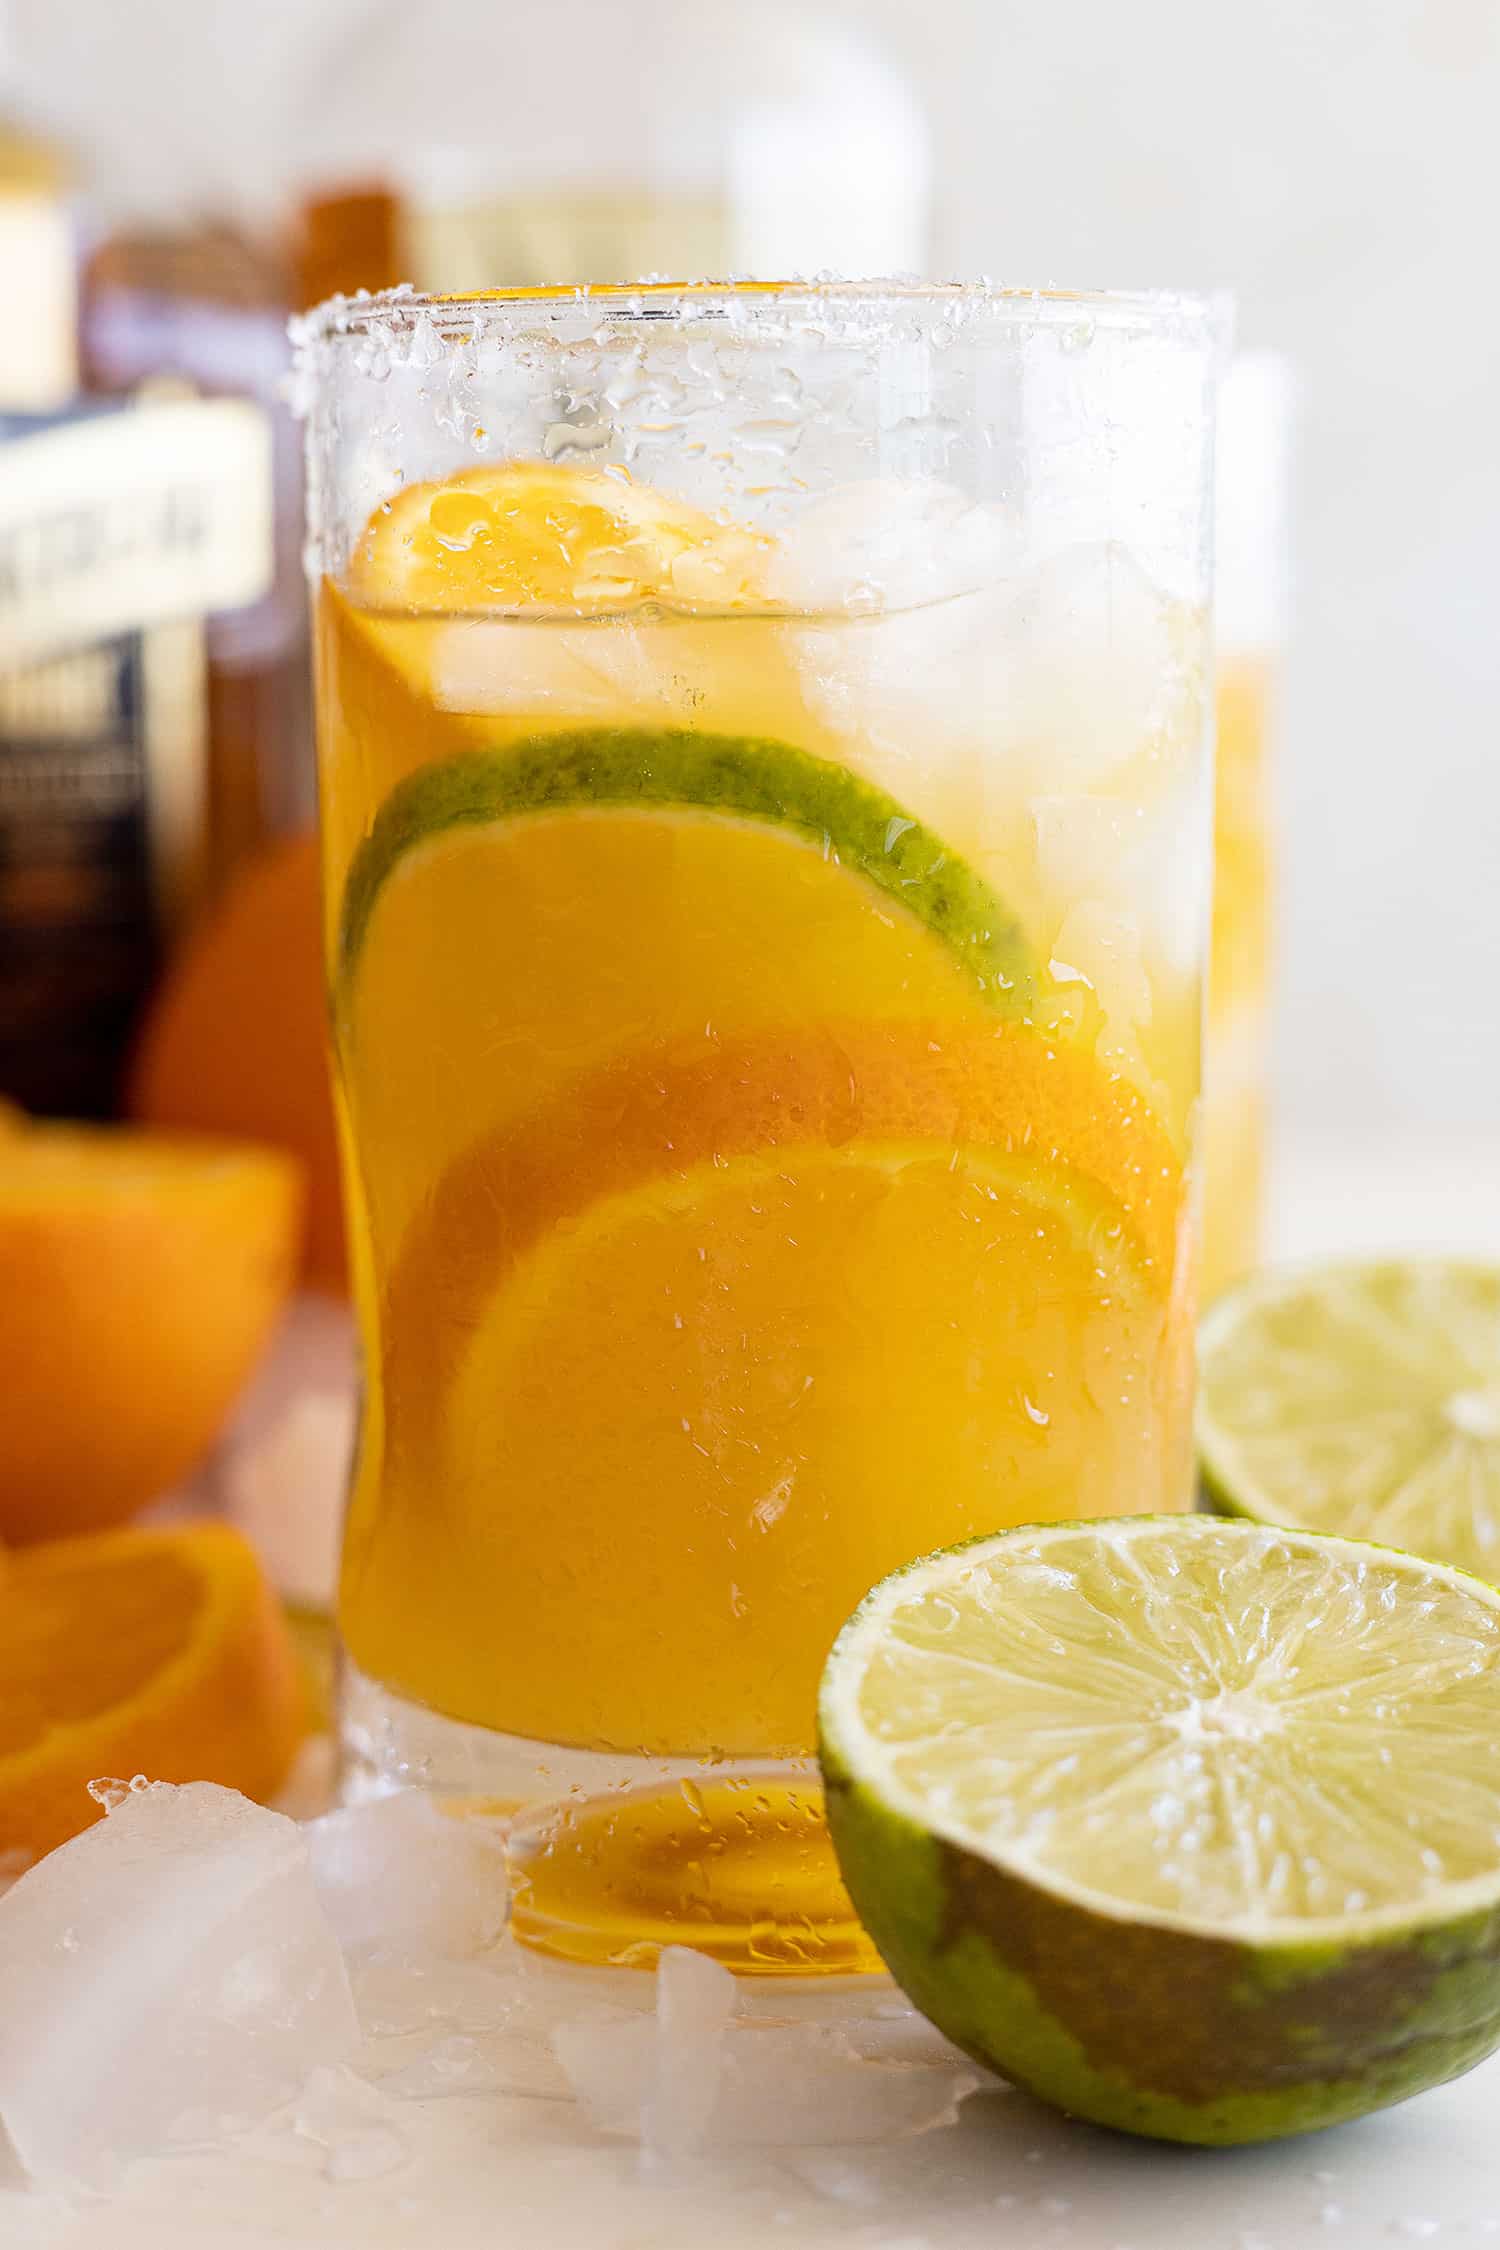 Glass of orange margarita with an orange and lime slice in it. Cut limes and oranges off to the sides.